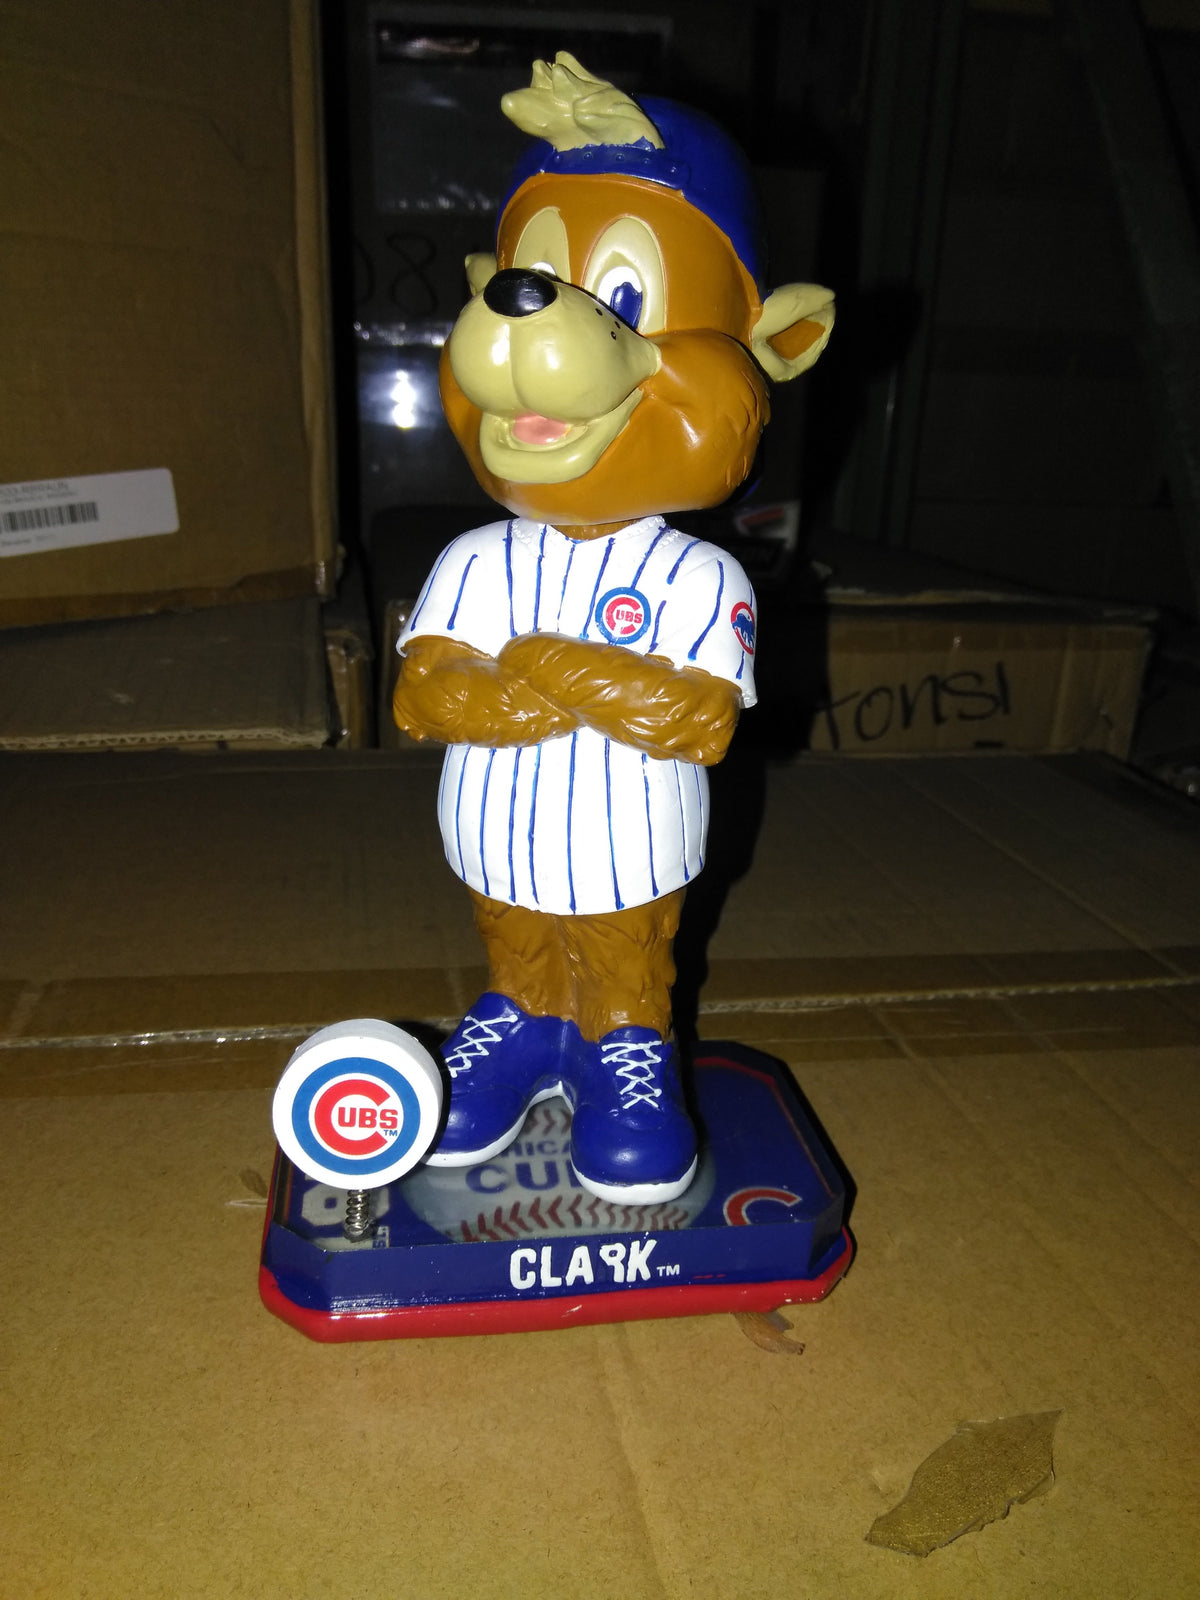 Clark Chicago Cubs Saint Patricks Day Mascot Bobblehead Officially Licensed by MLB